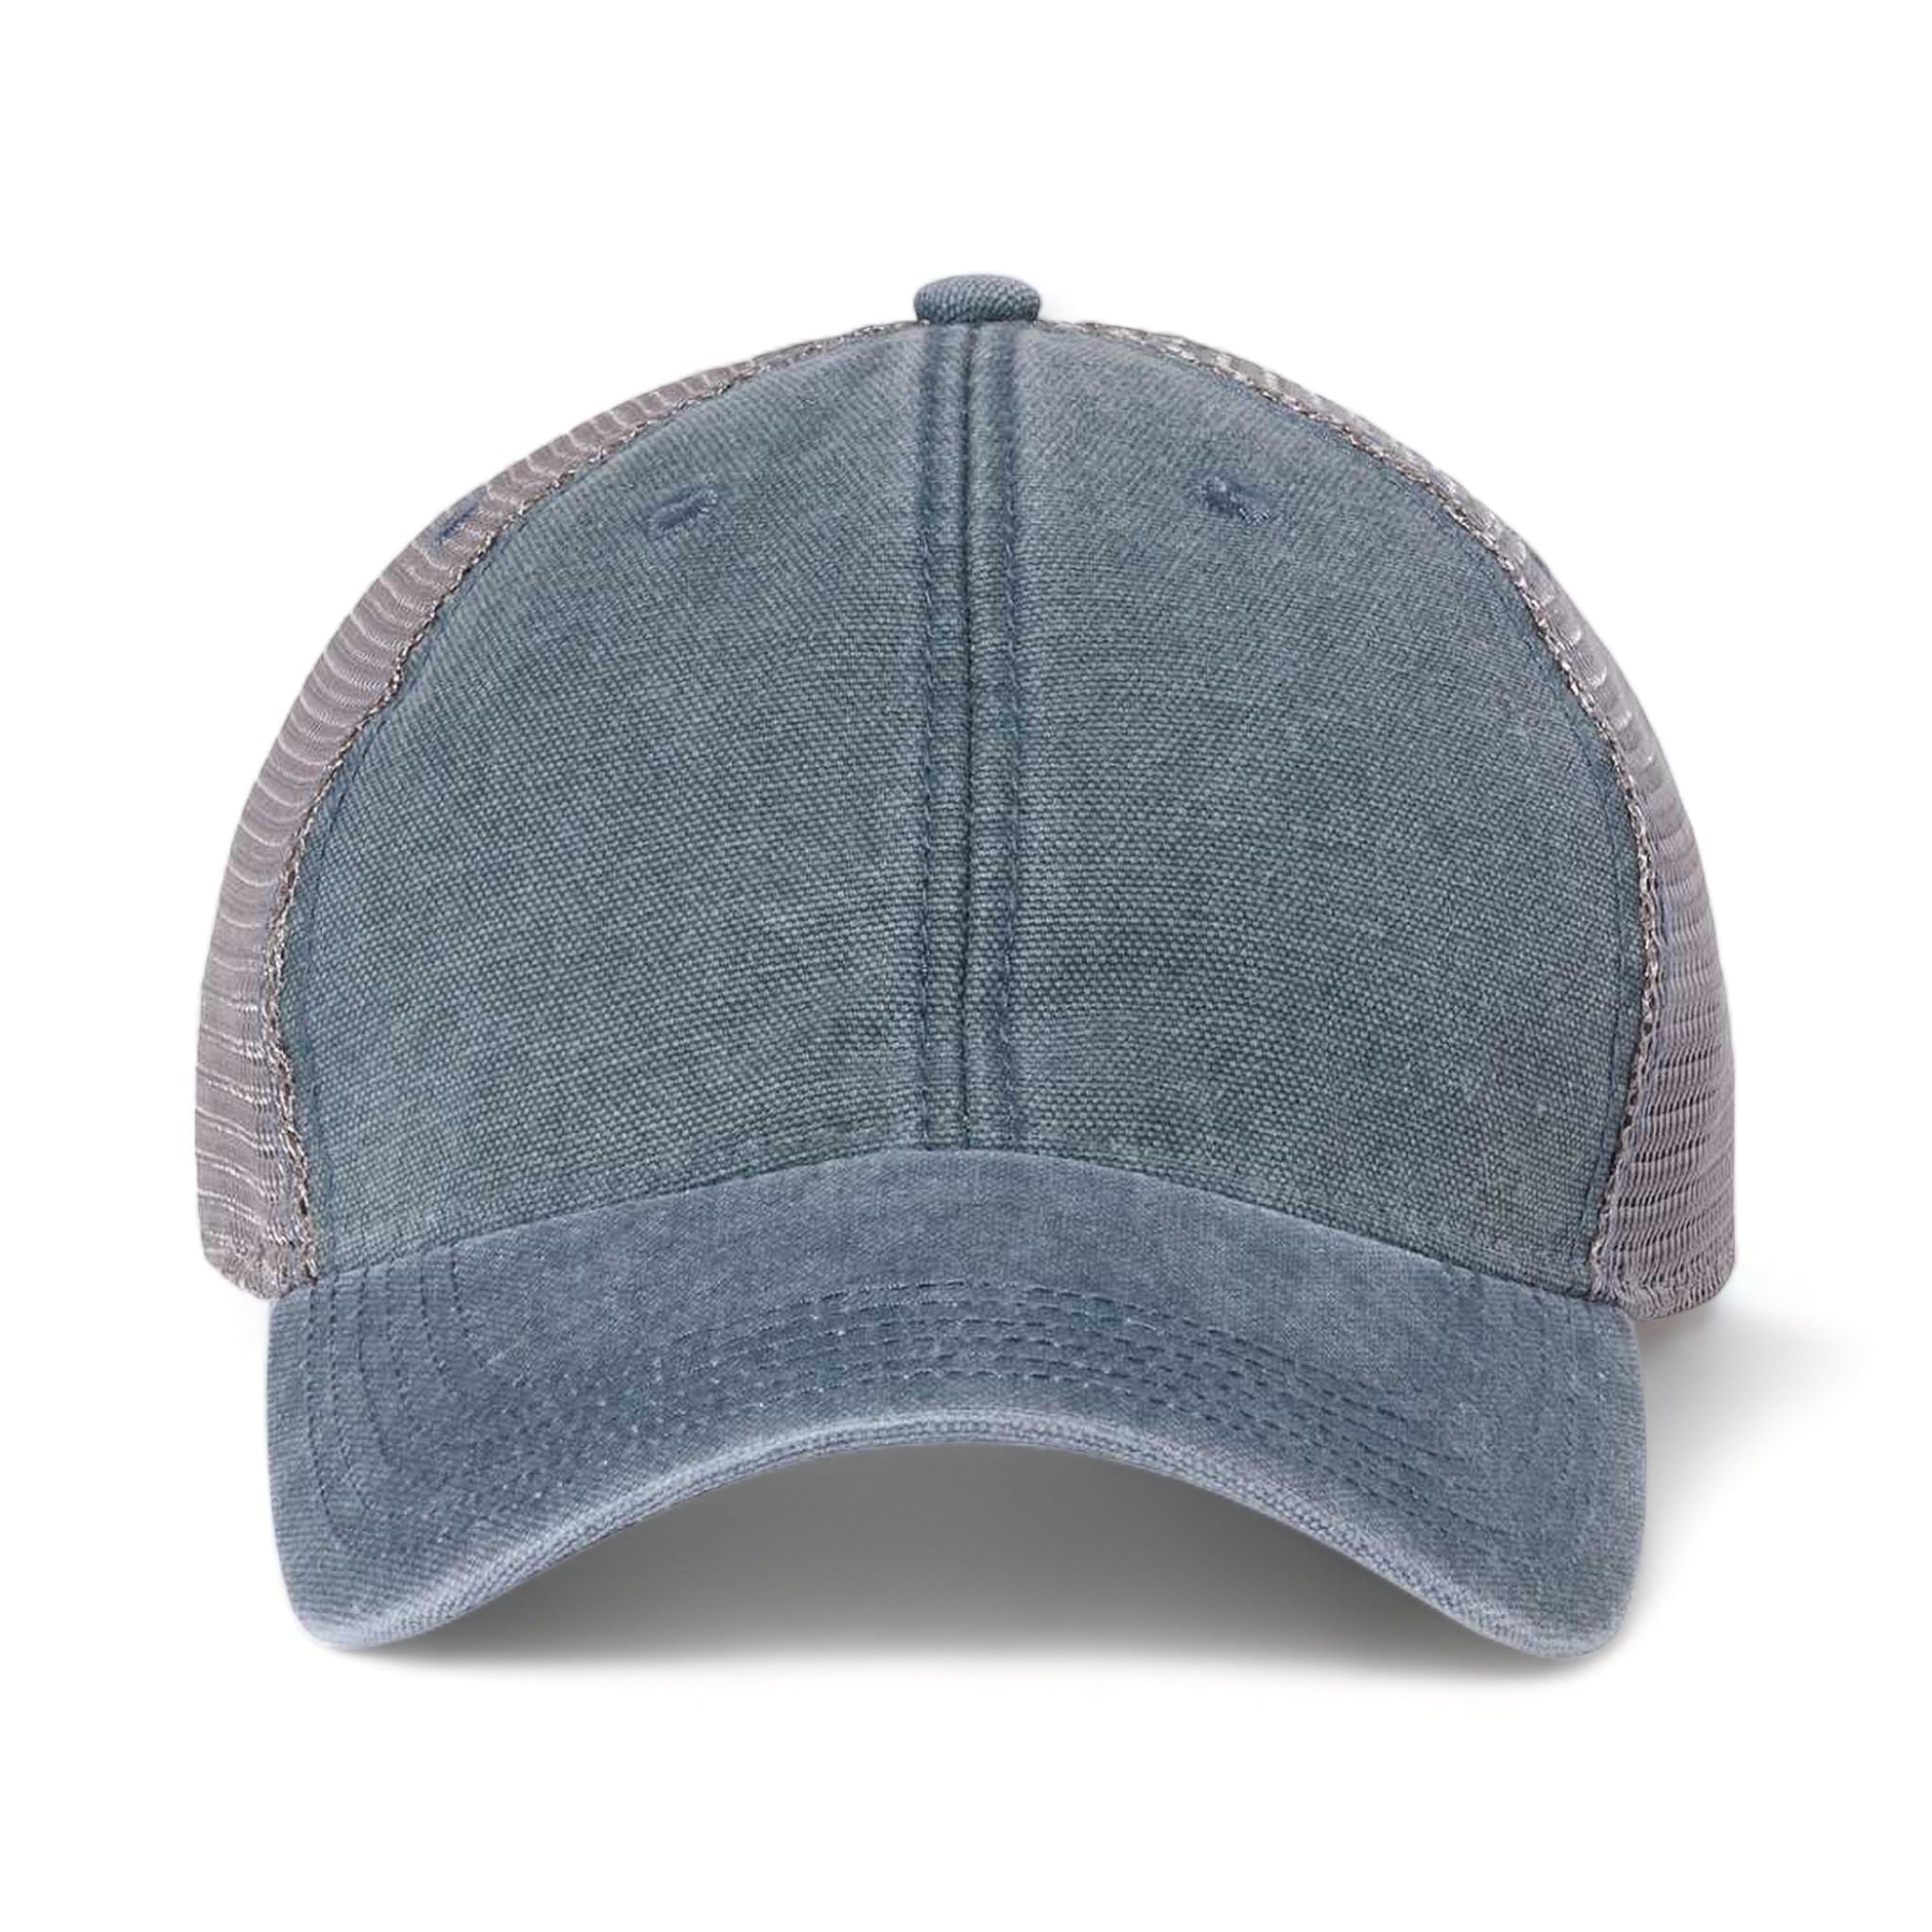 Front view of LEGACY DTA custom hat in blue steel and grey